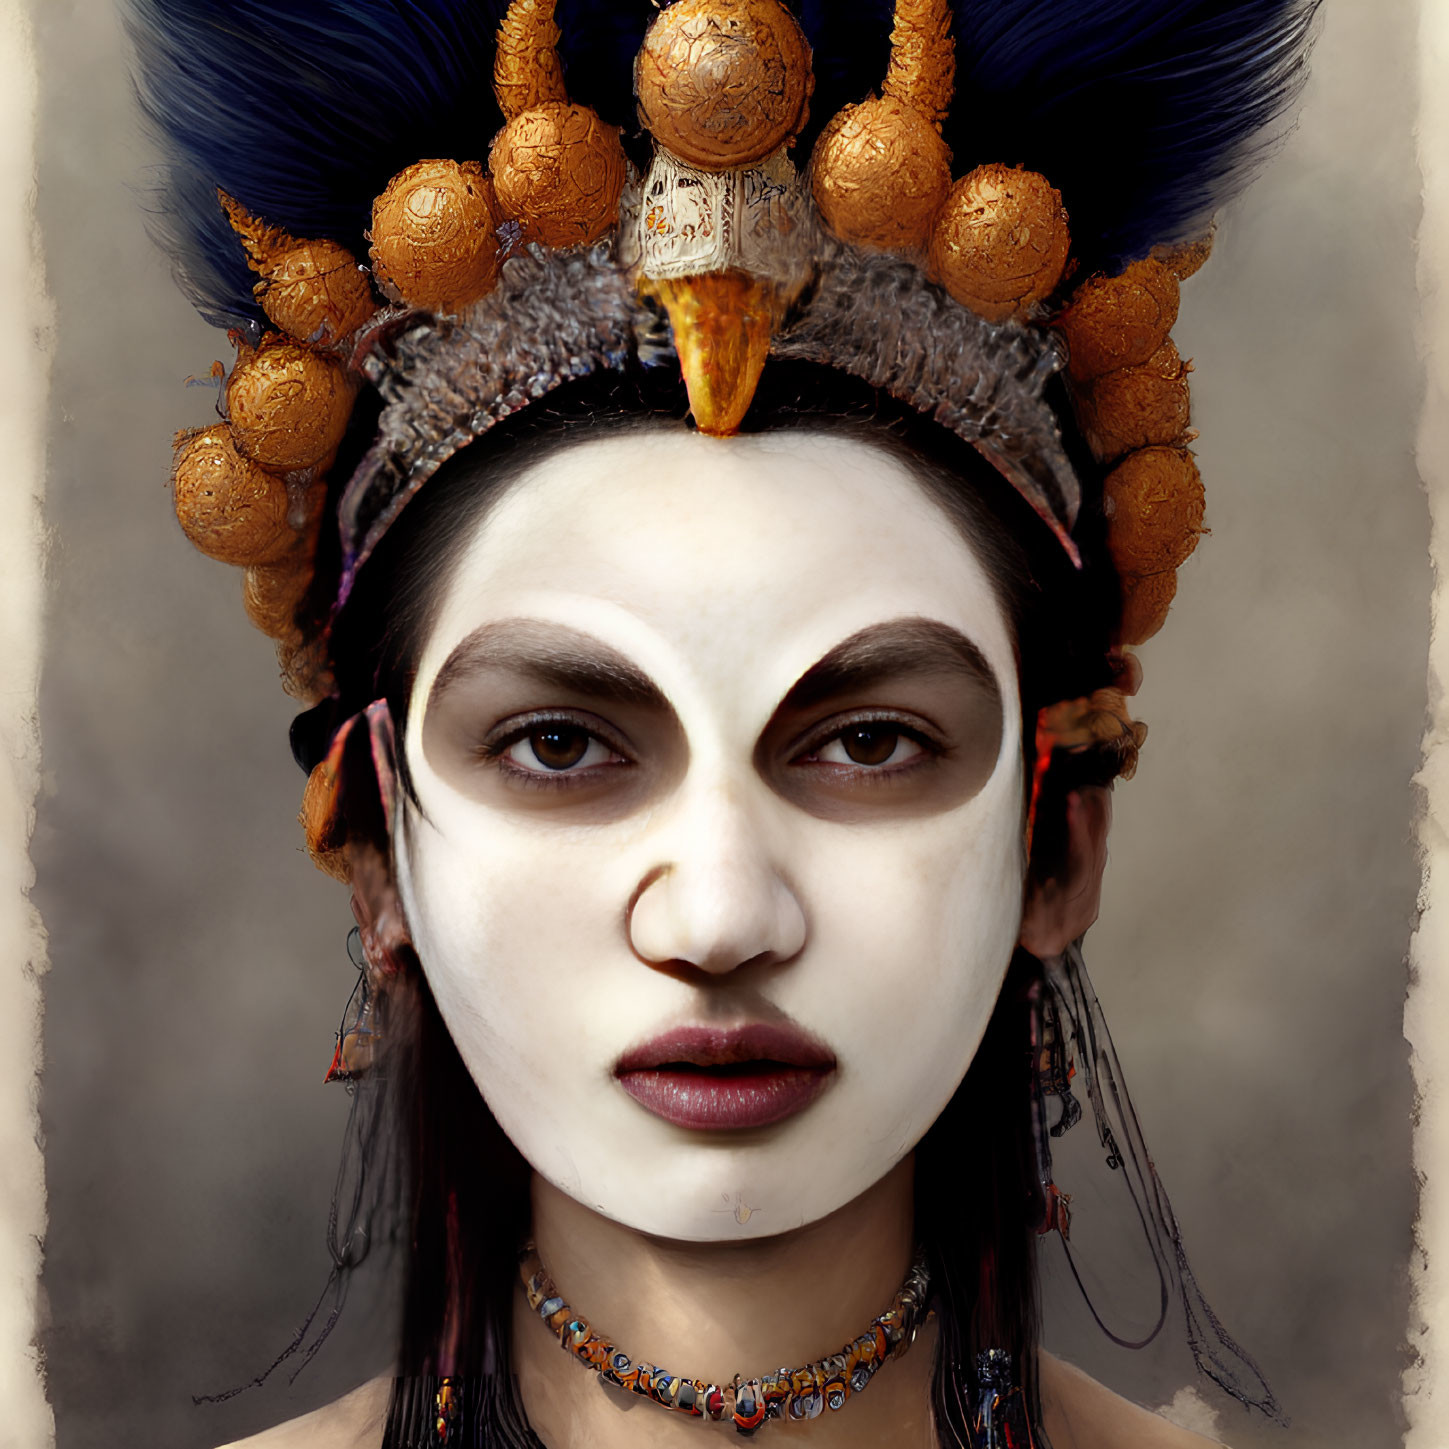 Person with dramatic white and black face makeup and ornate headdress.